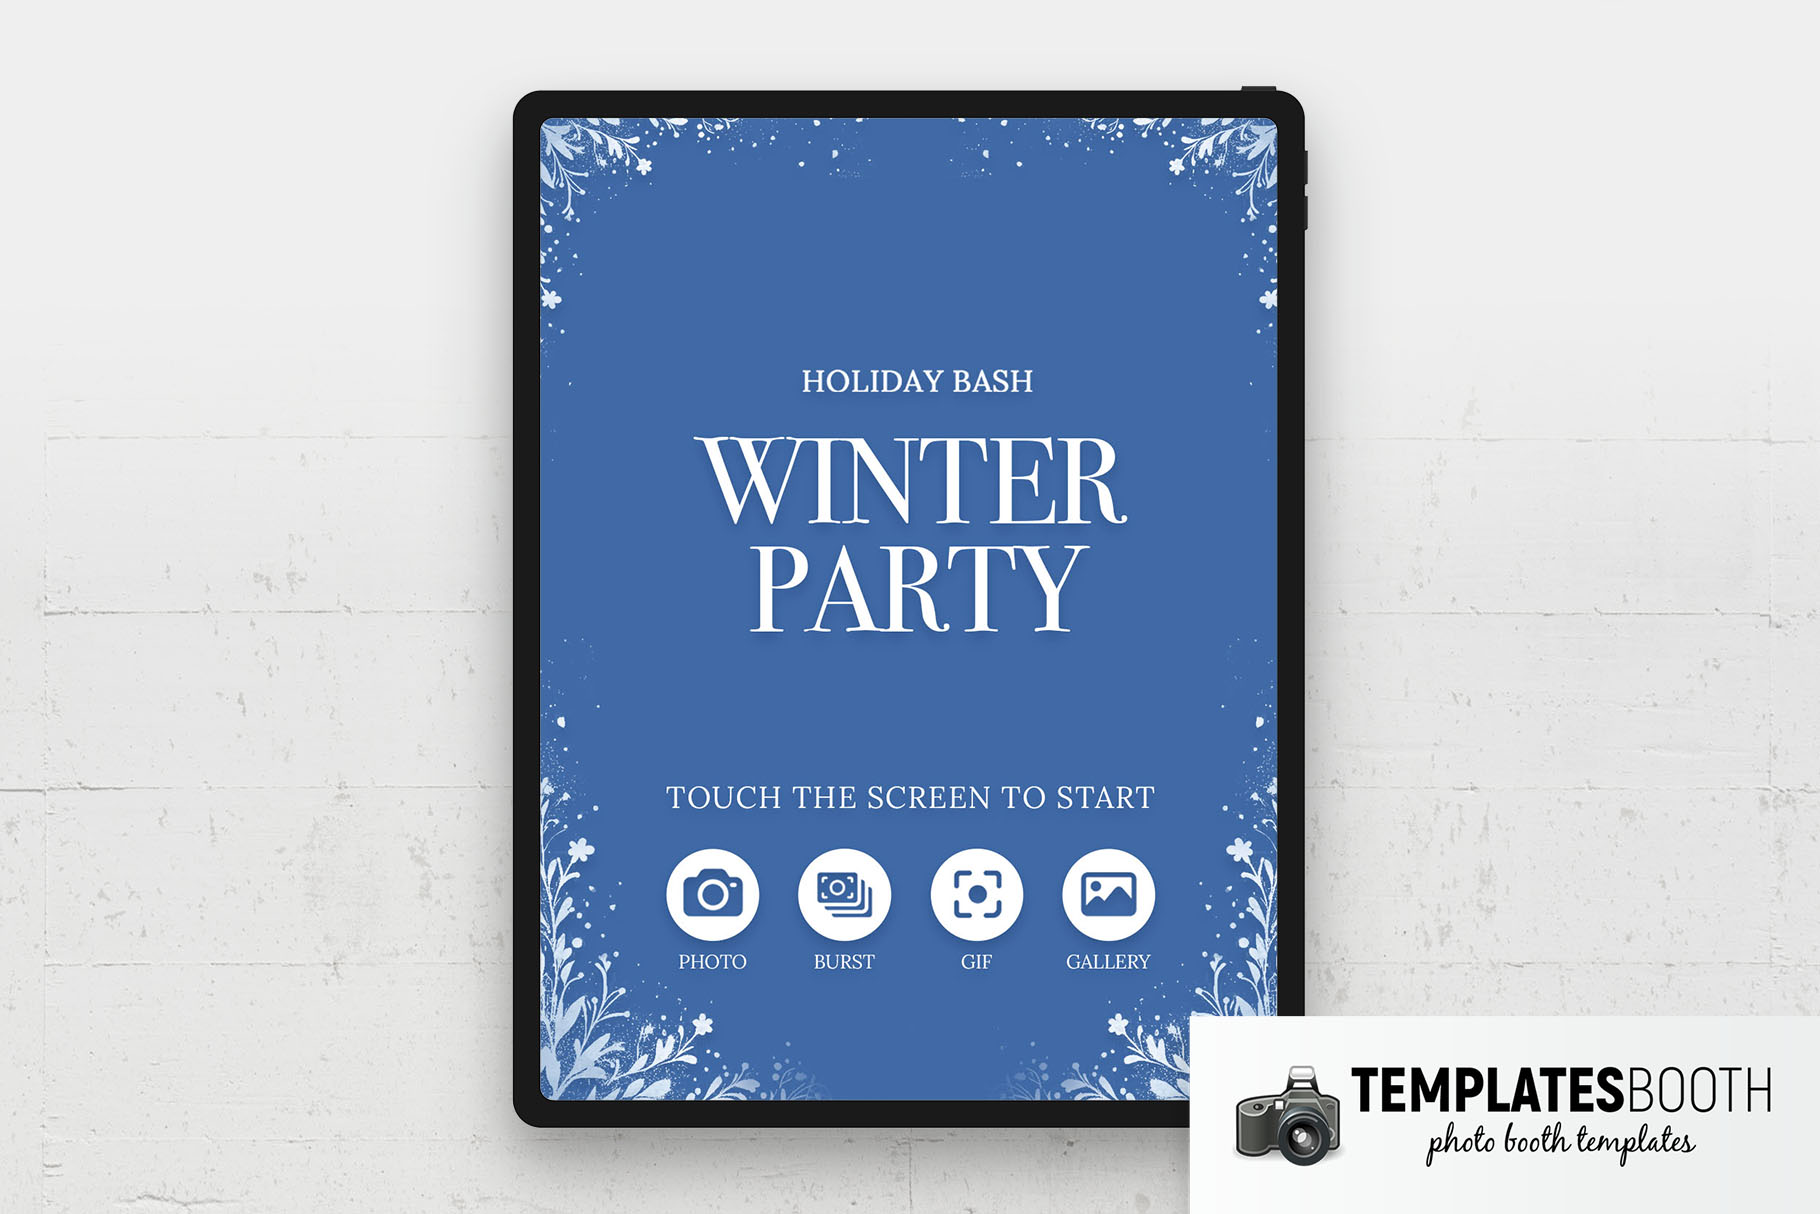 Winter Party Photo Booth Welcome Screen